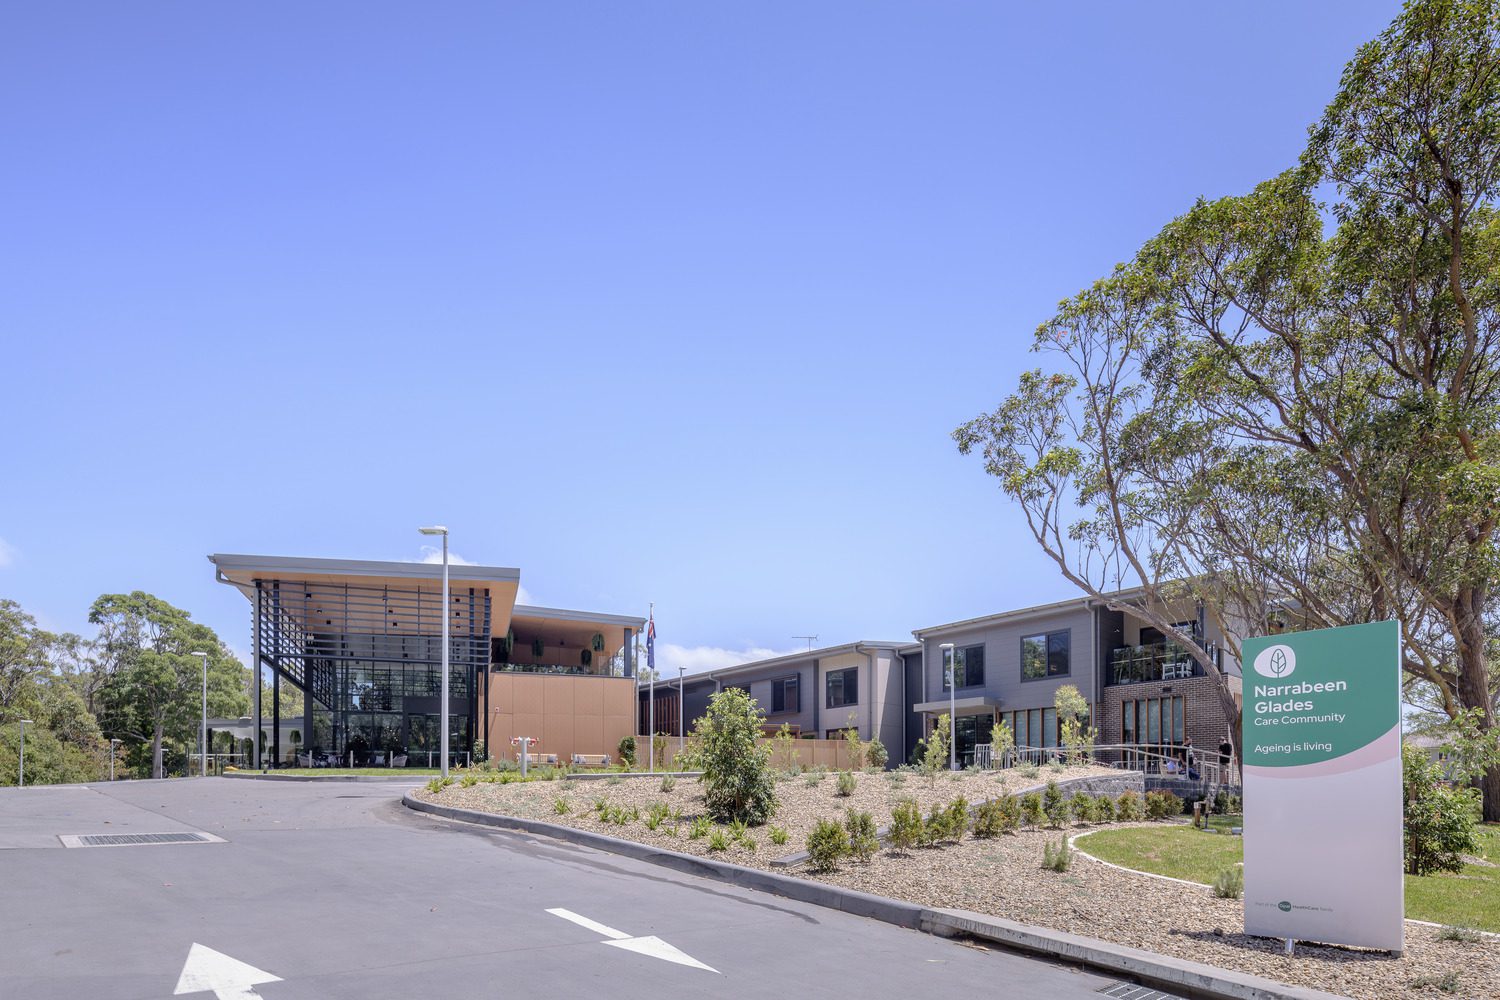 Narrabeen Glades Aged Care, Warriewood. Architecture by Group GSA, Built by Stephen Edwards Construction, Photography by The Guthrie Project.